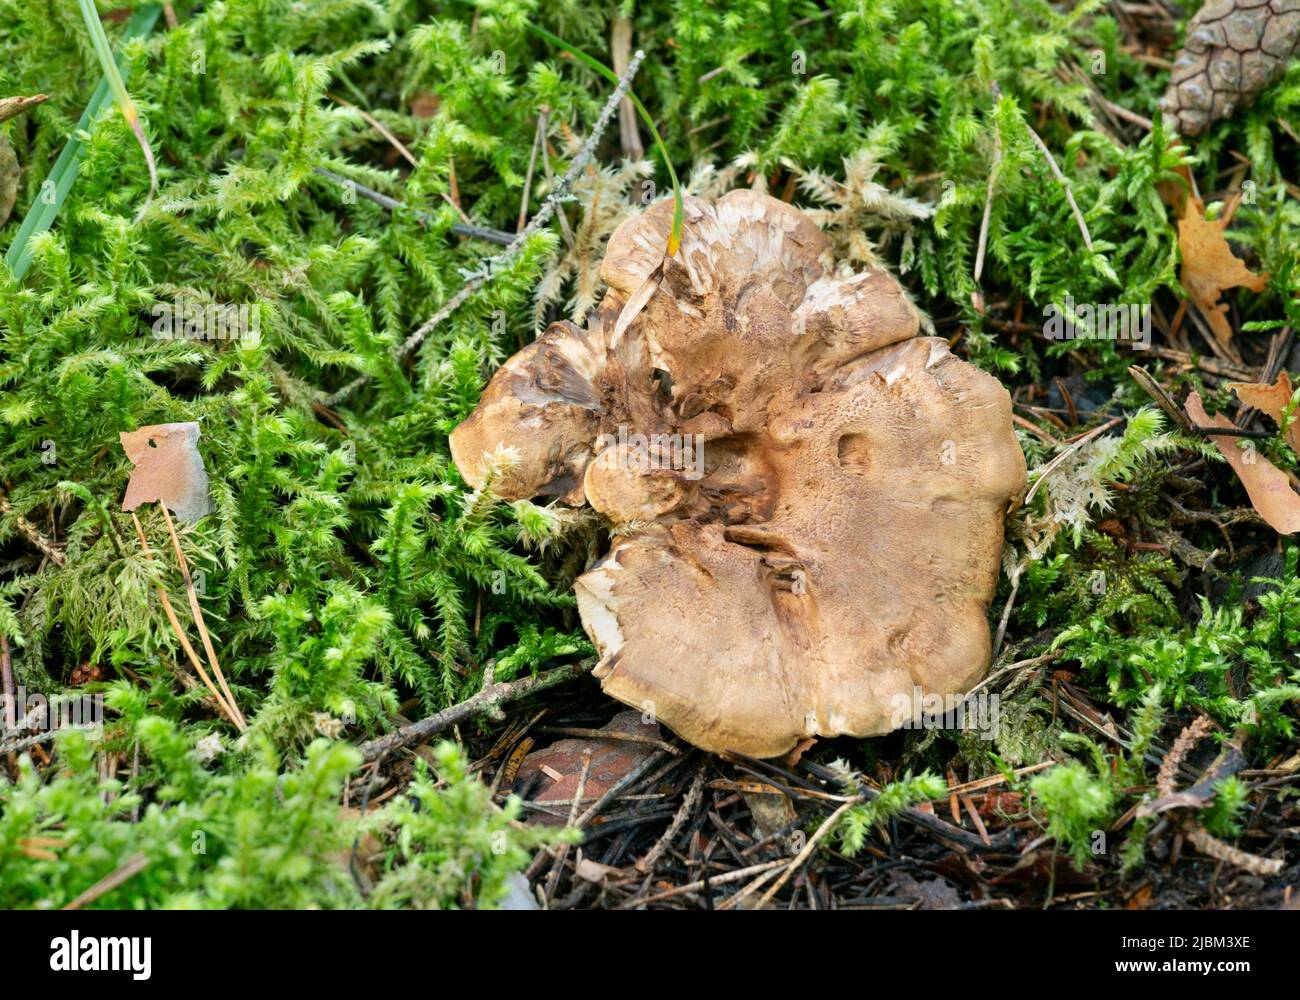 Tooth fungus growing among moss in natural environment Stock Photo